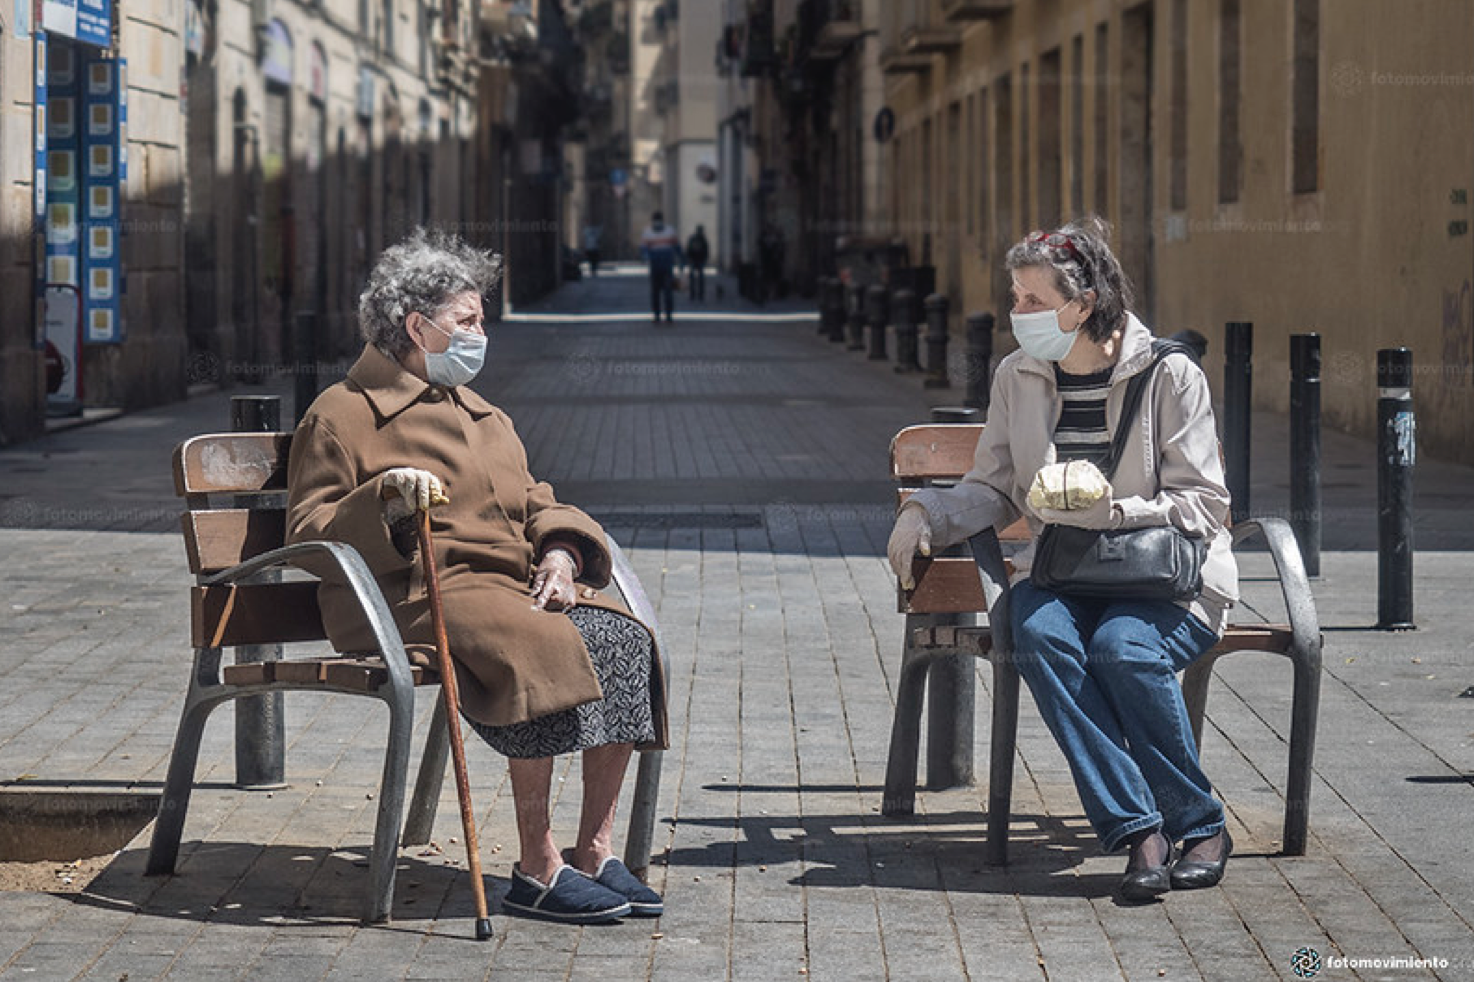 Mother and daughter maintain social distancing and wear protective masks as they share time in the spring sunshine, May 3, 2020, Barcelona, Spain (Photo by Fotomovimiento) Creative Commons license via Flickr 